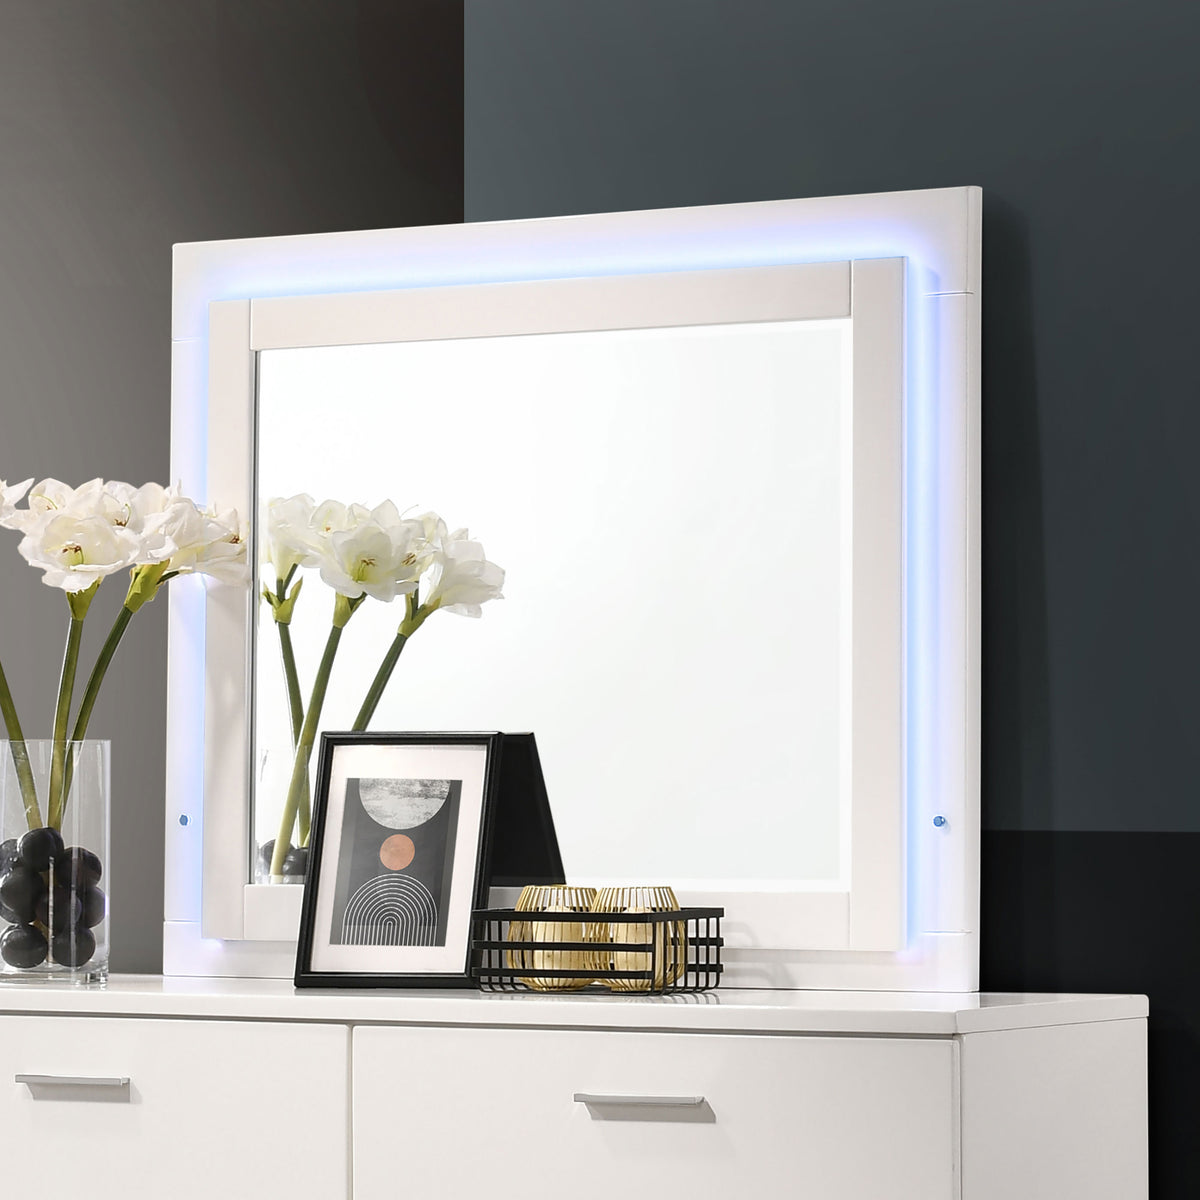 Felicity Dresser Mirror Glossy White with LED Light Felicity Dresser Mirror Glossy White with LED Light Half Price Furniture